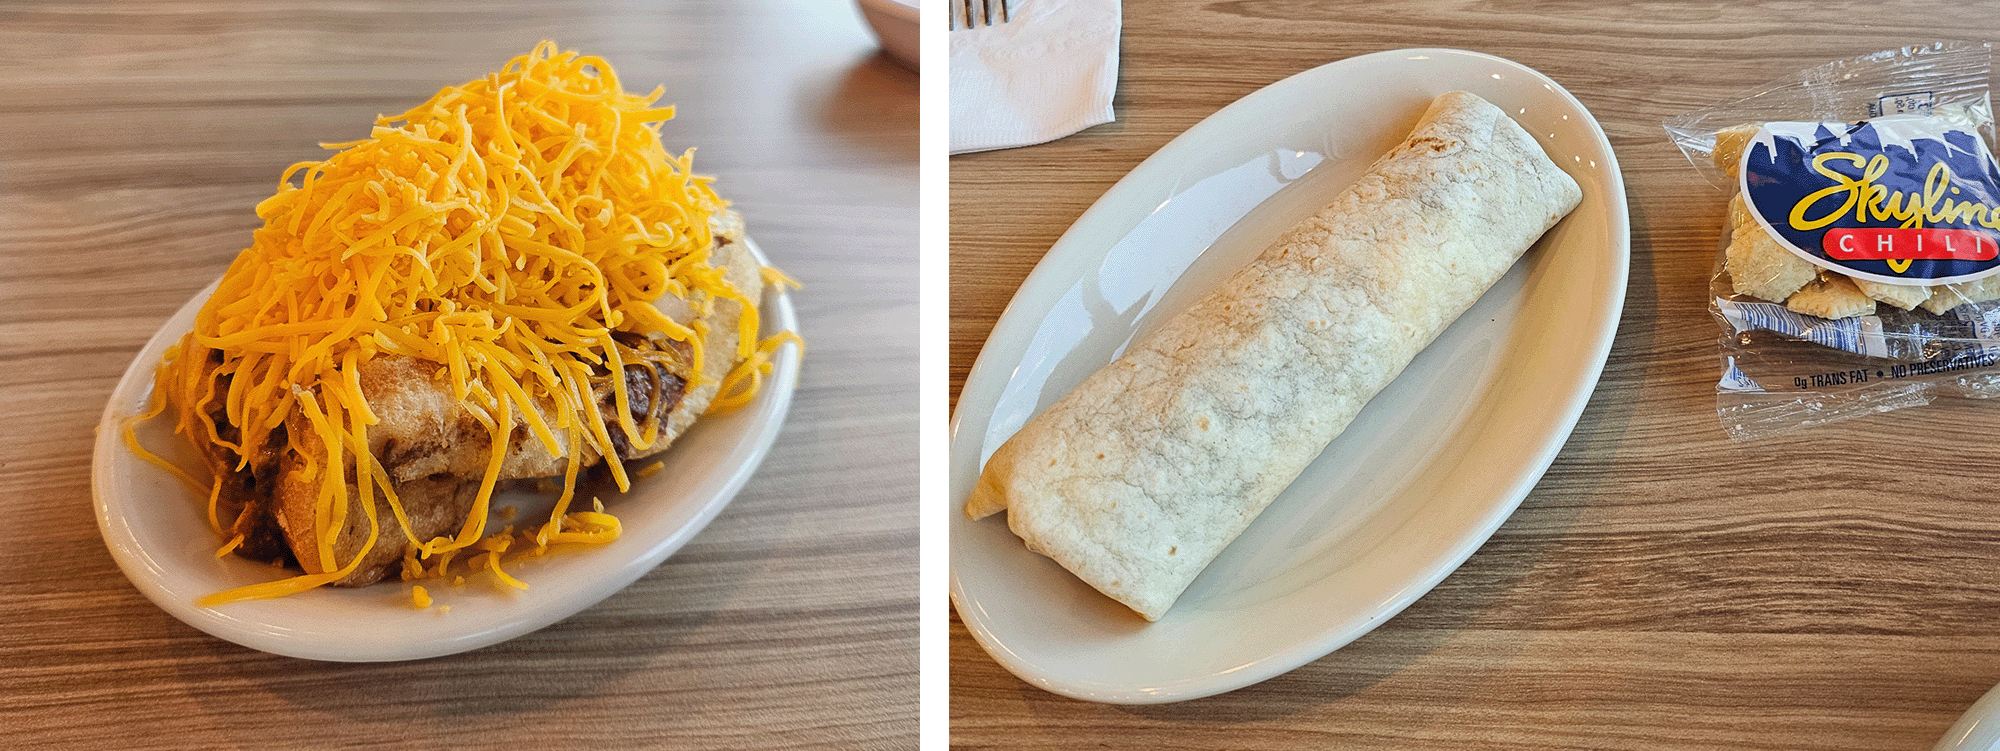 two images with chili dog and burrito